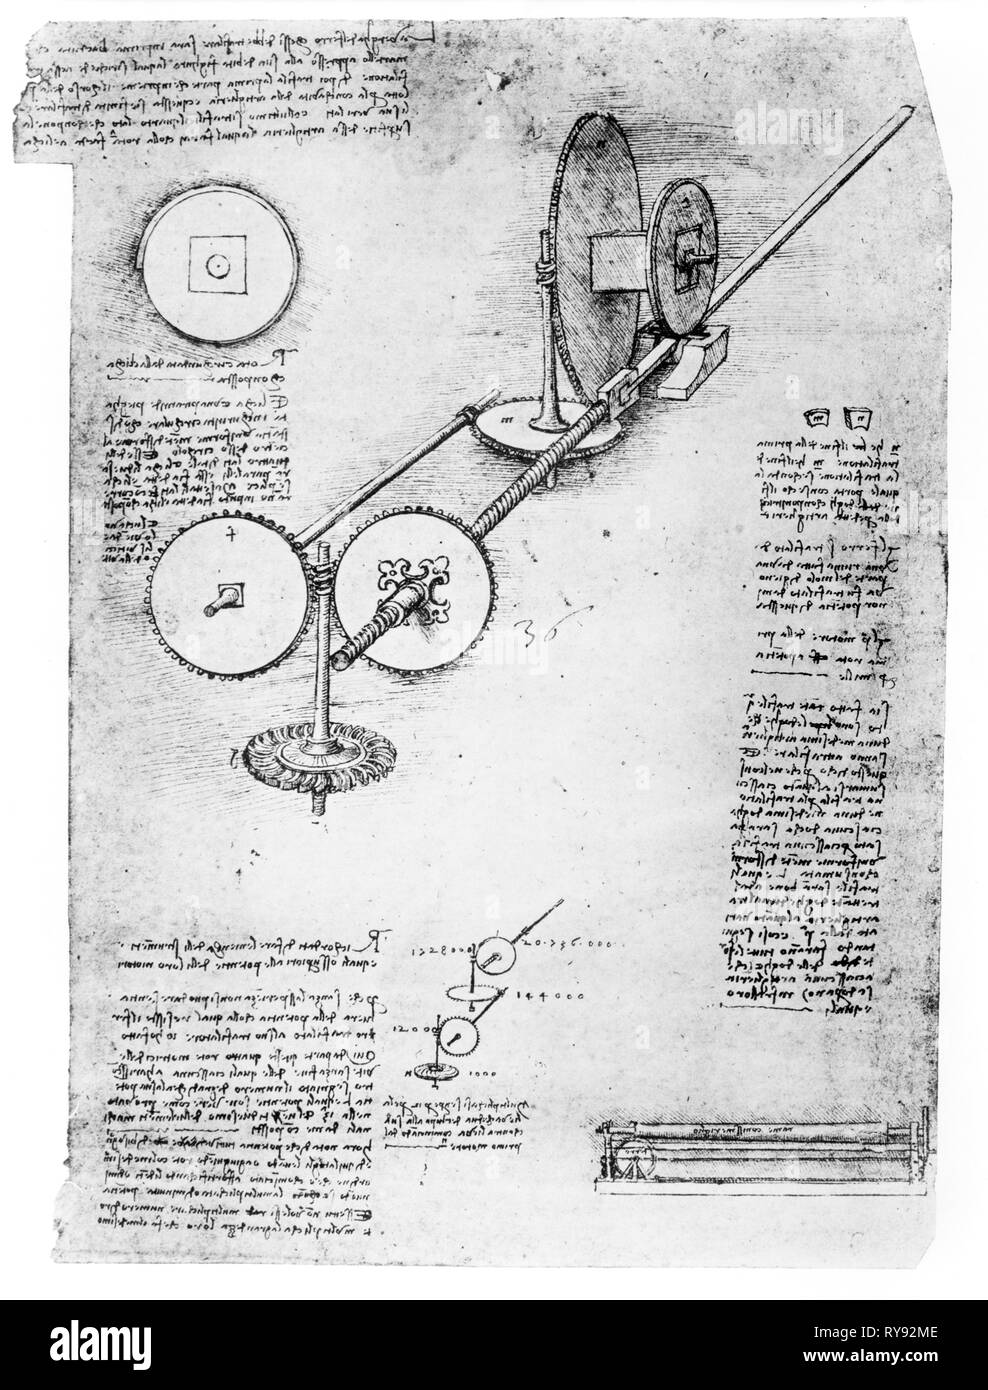 Mechanical wing with gears, technical and mechanical drawings from a notebook, Leonardo da Vinci (1452-1519) Stock Photo